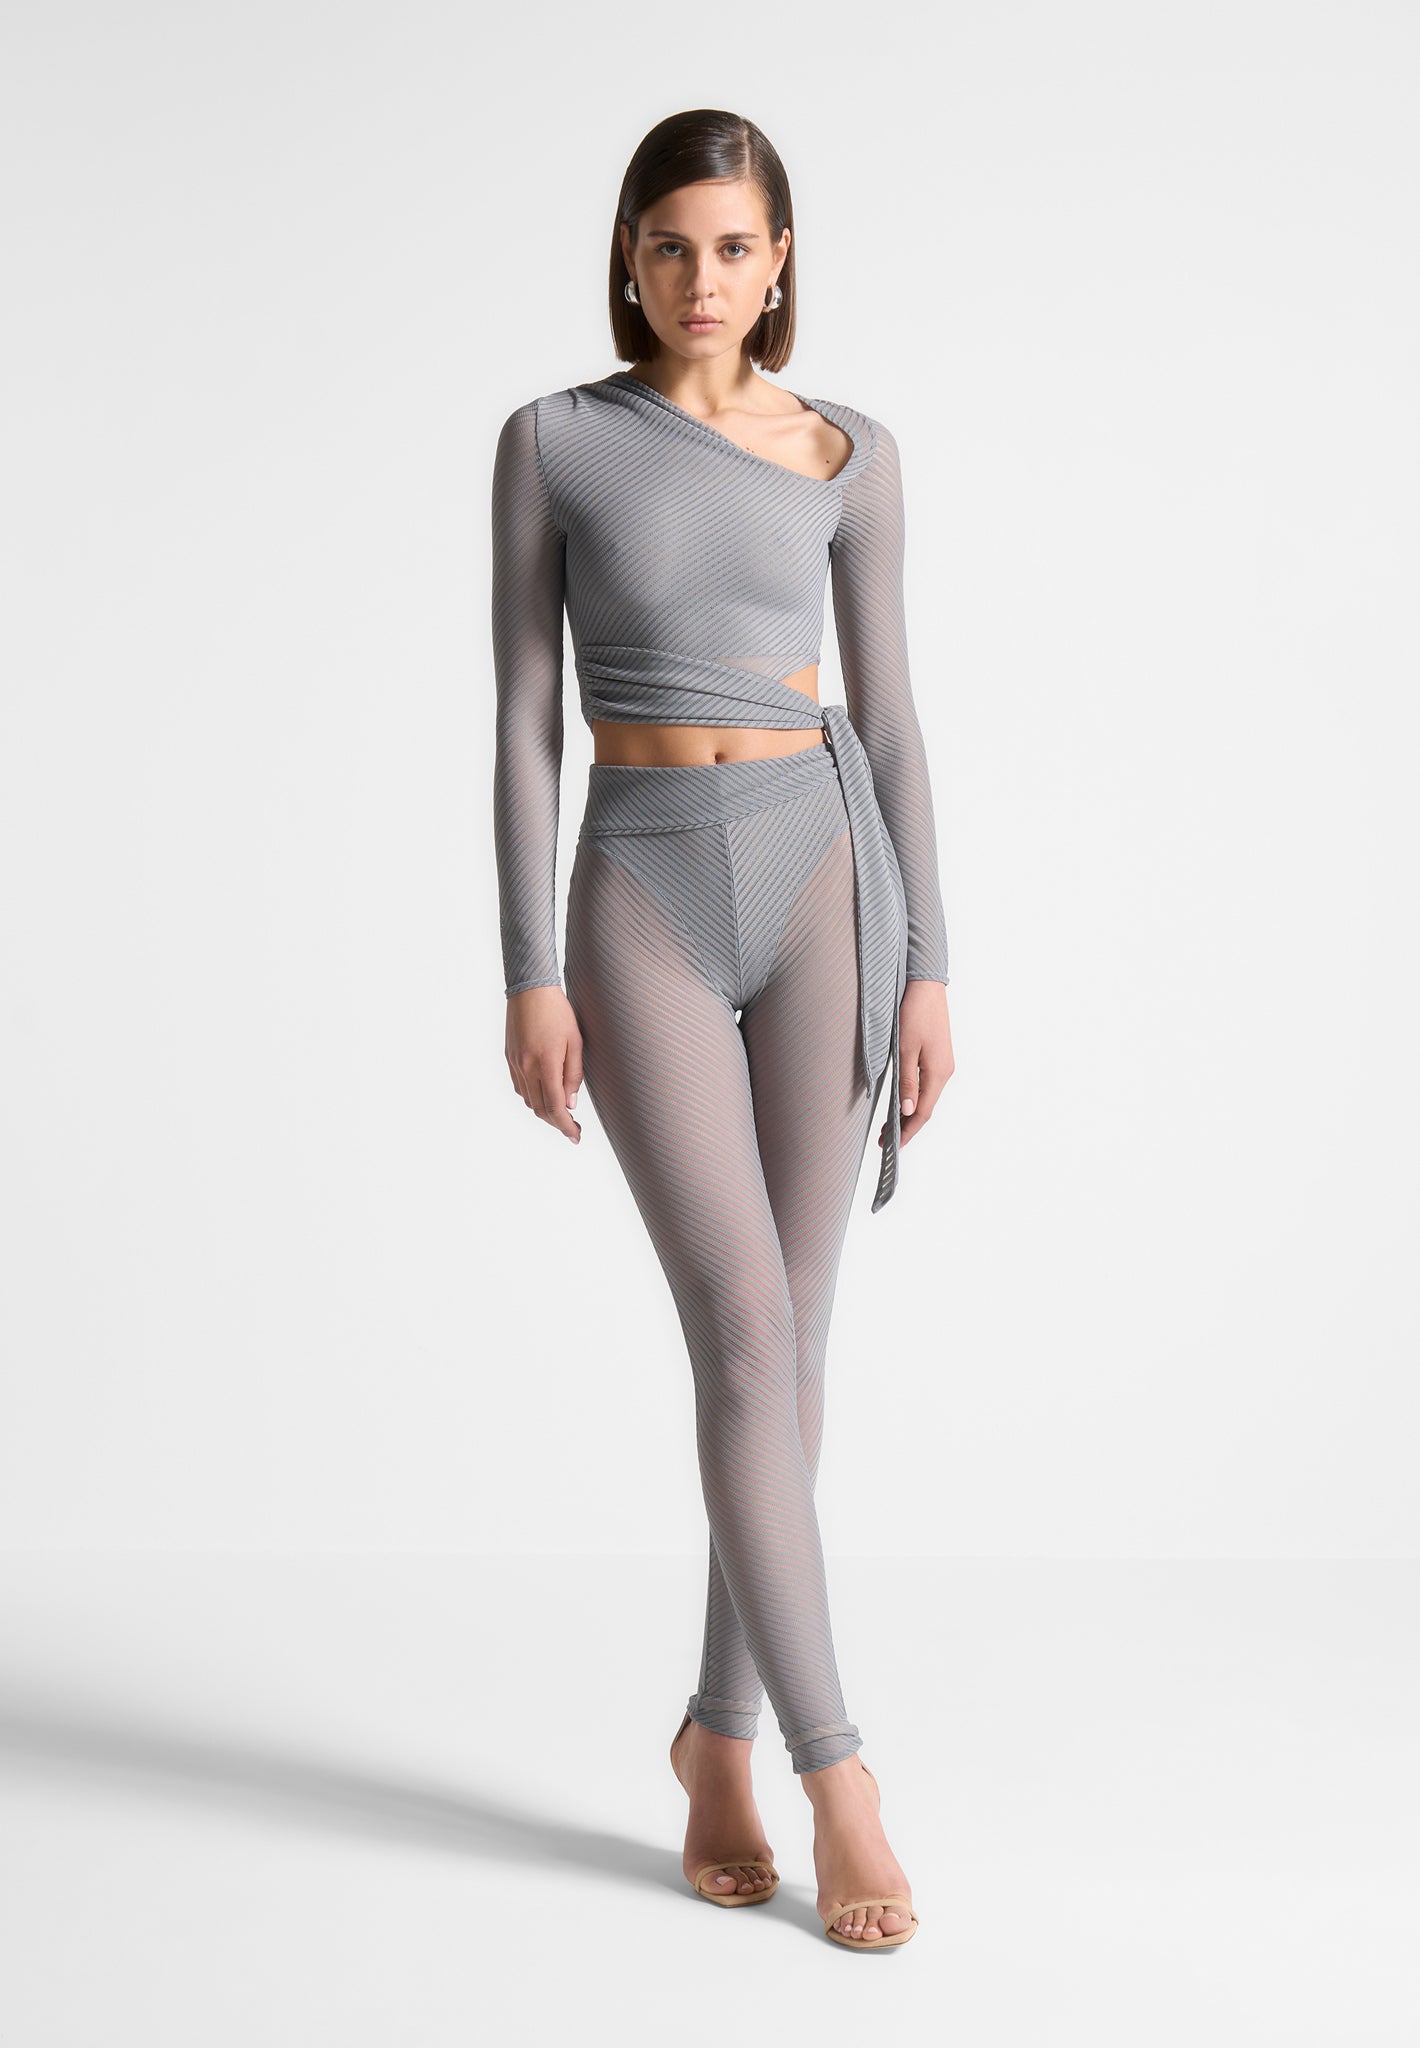 ribbed-sheer-top-with-tie-grey